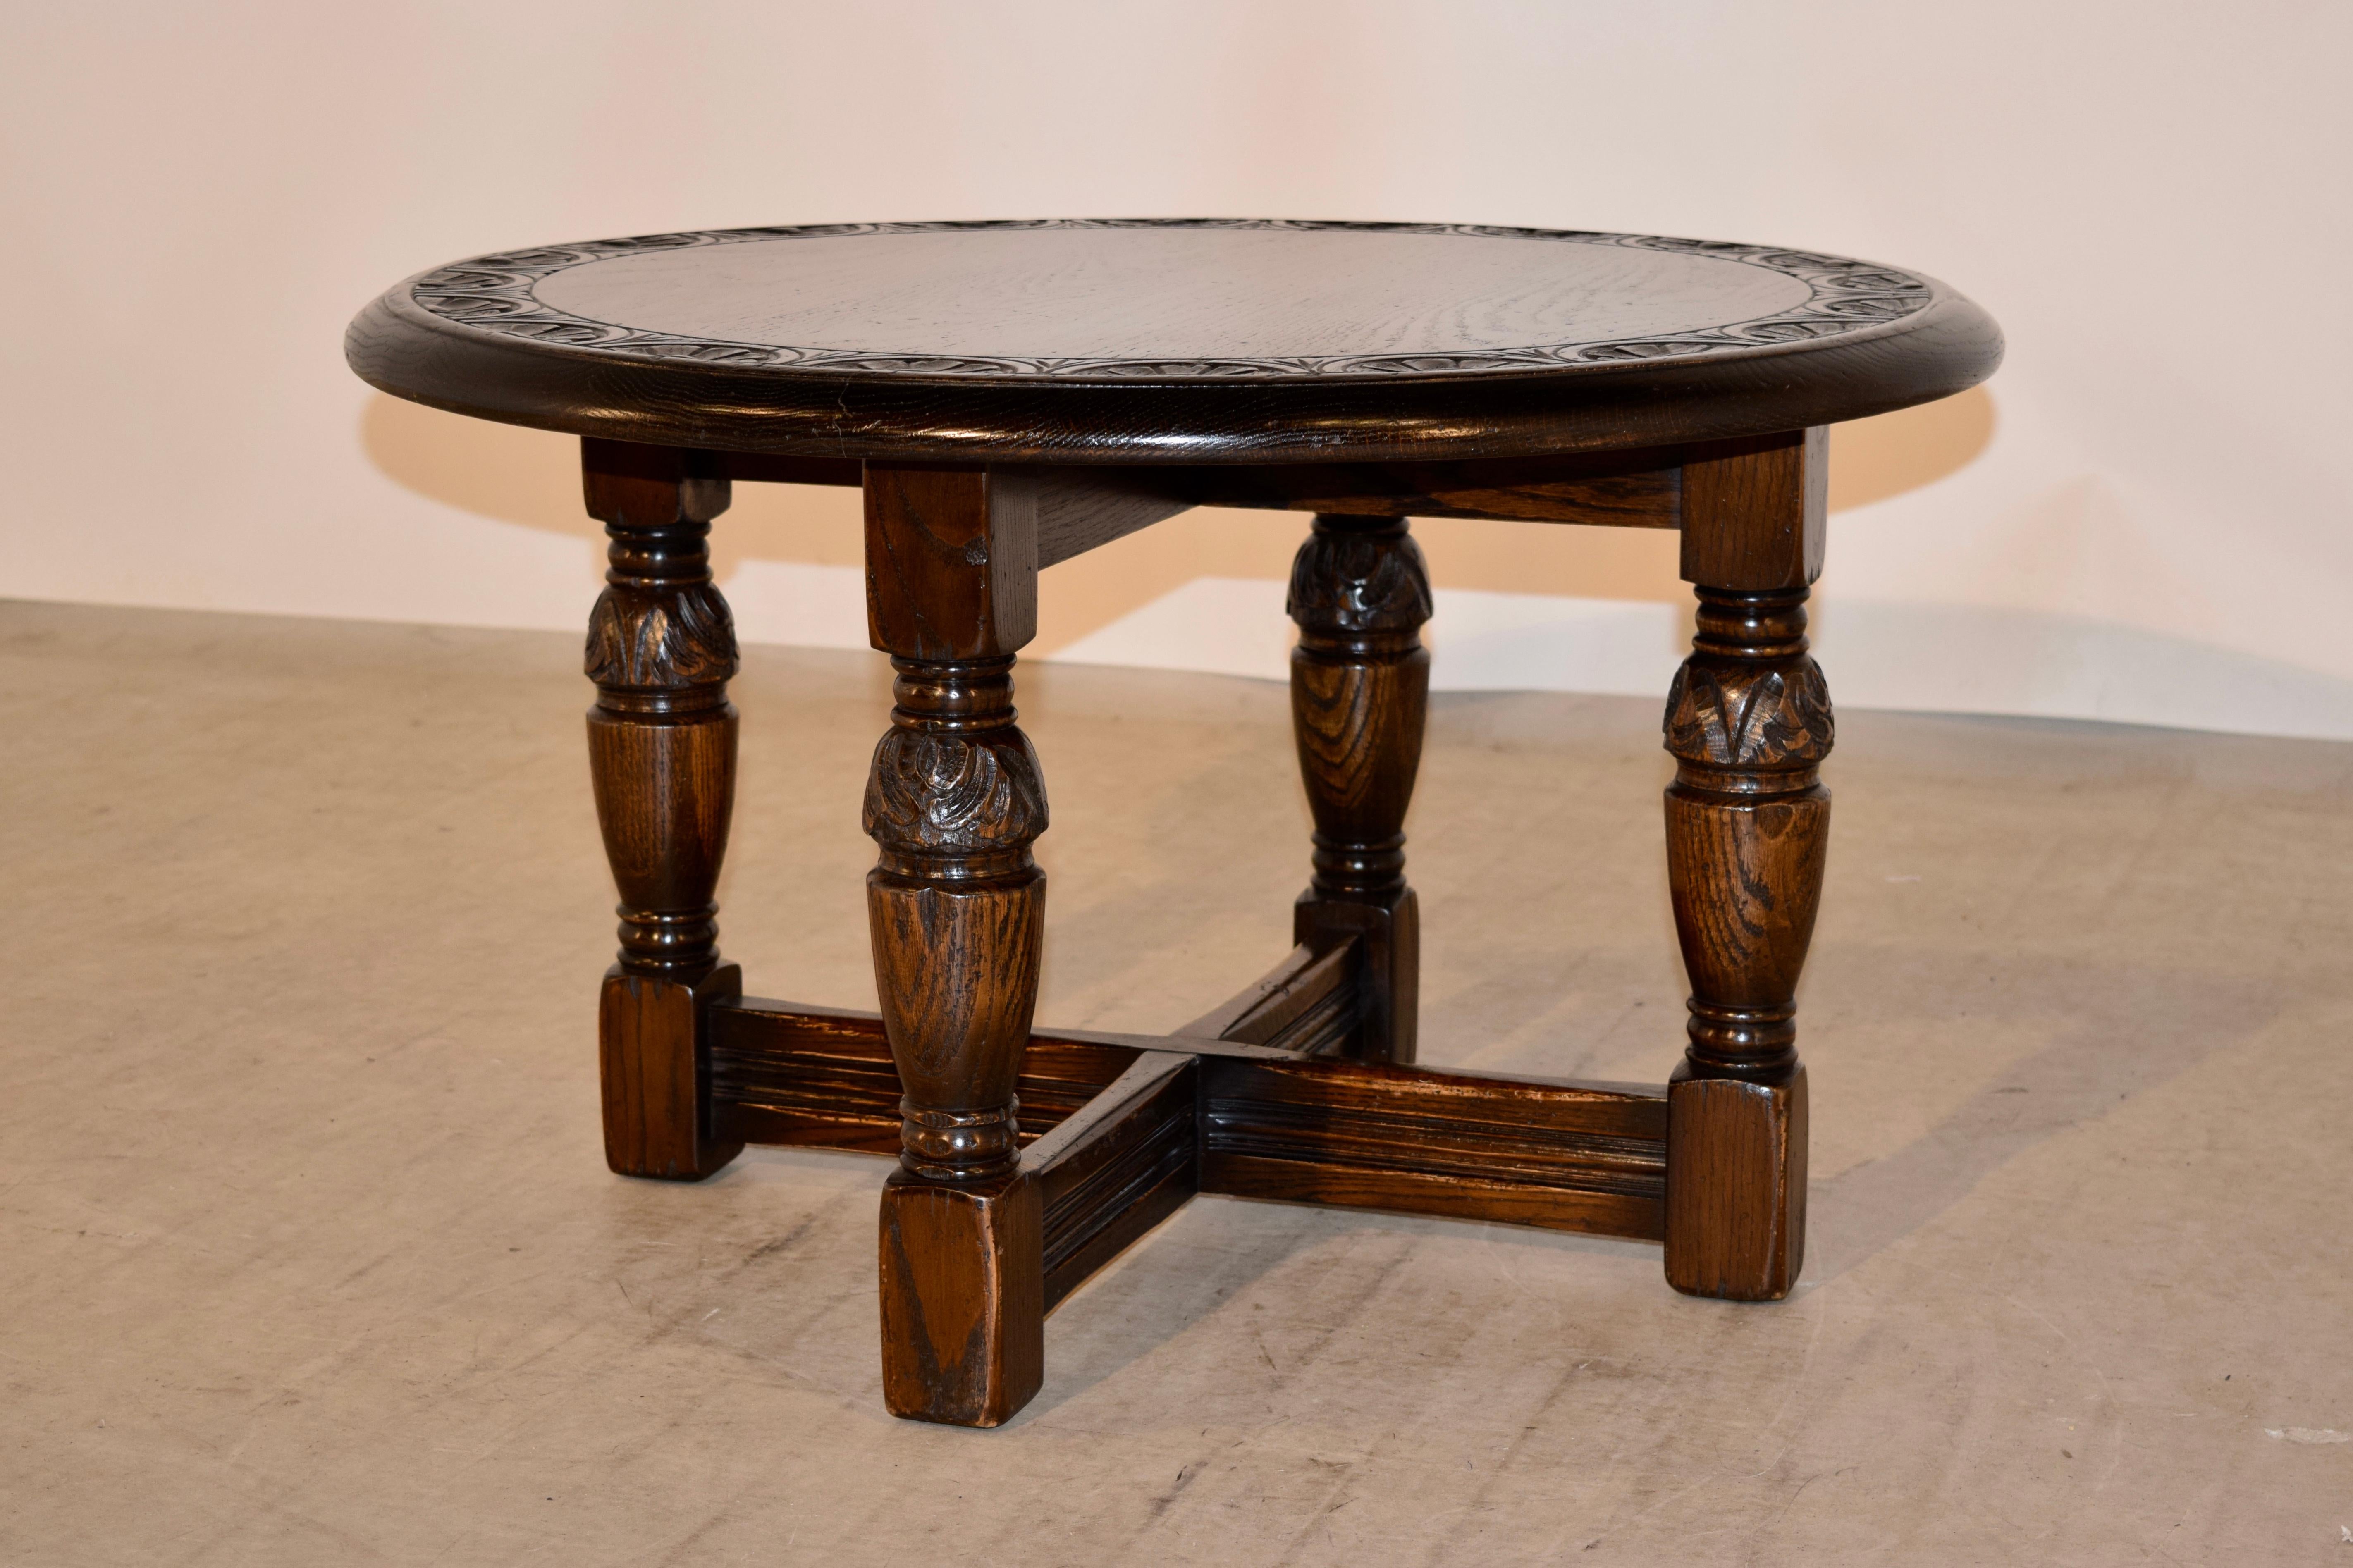 19th century coffee or cocktail table from England made from oak. The top has a beveled edge and is banded around the edge with hand carved decoration. The legs are also hand turned and carved decorated and are joined by cross stretchers.